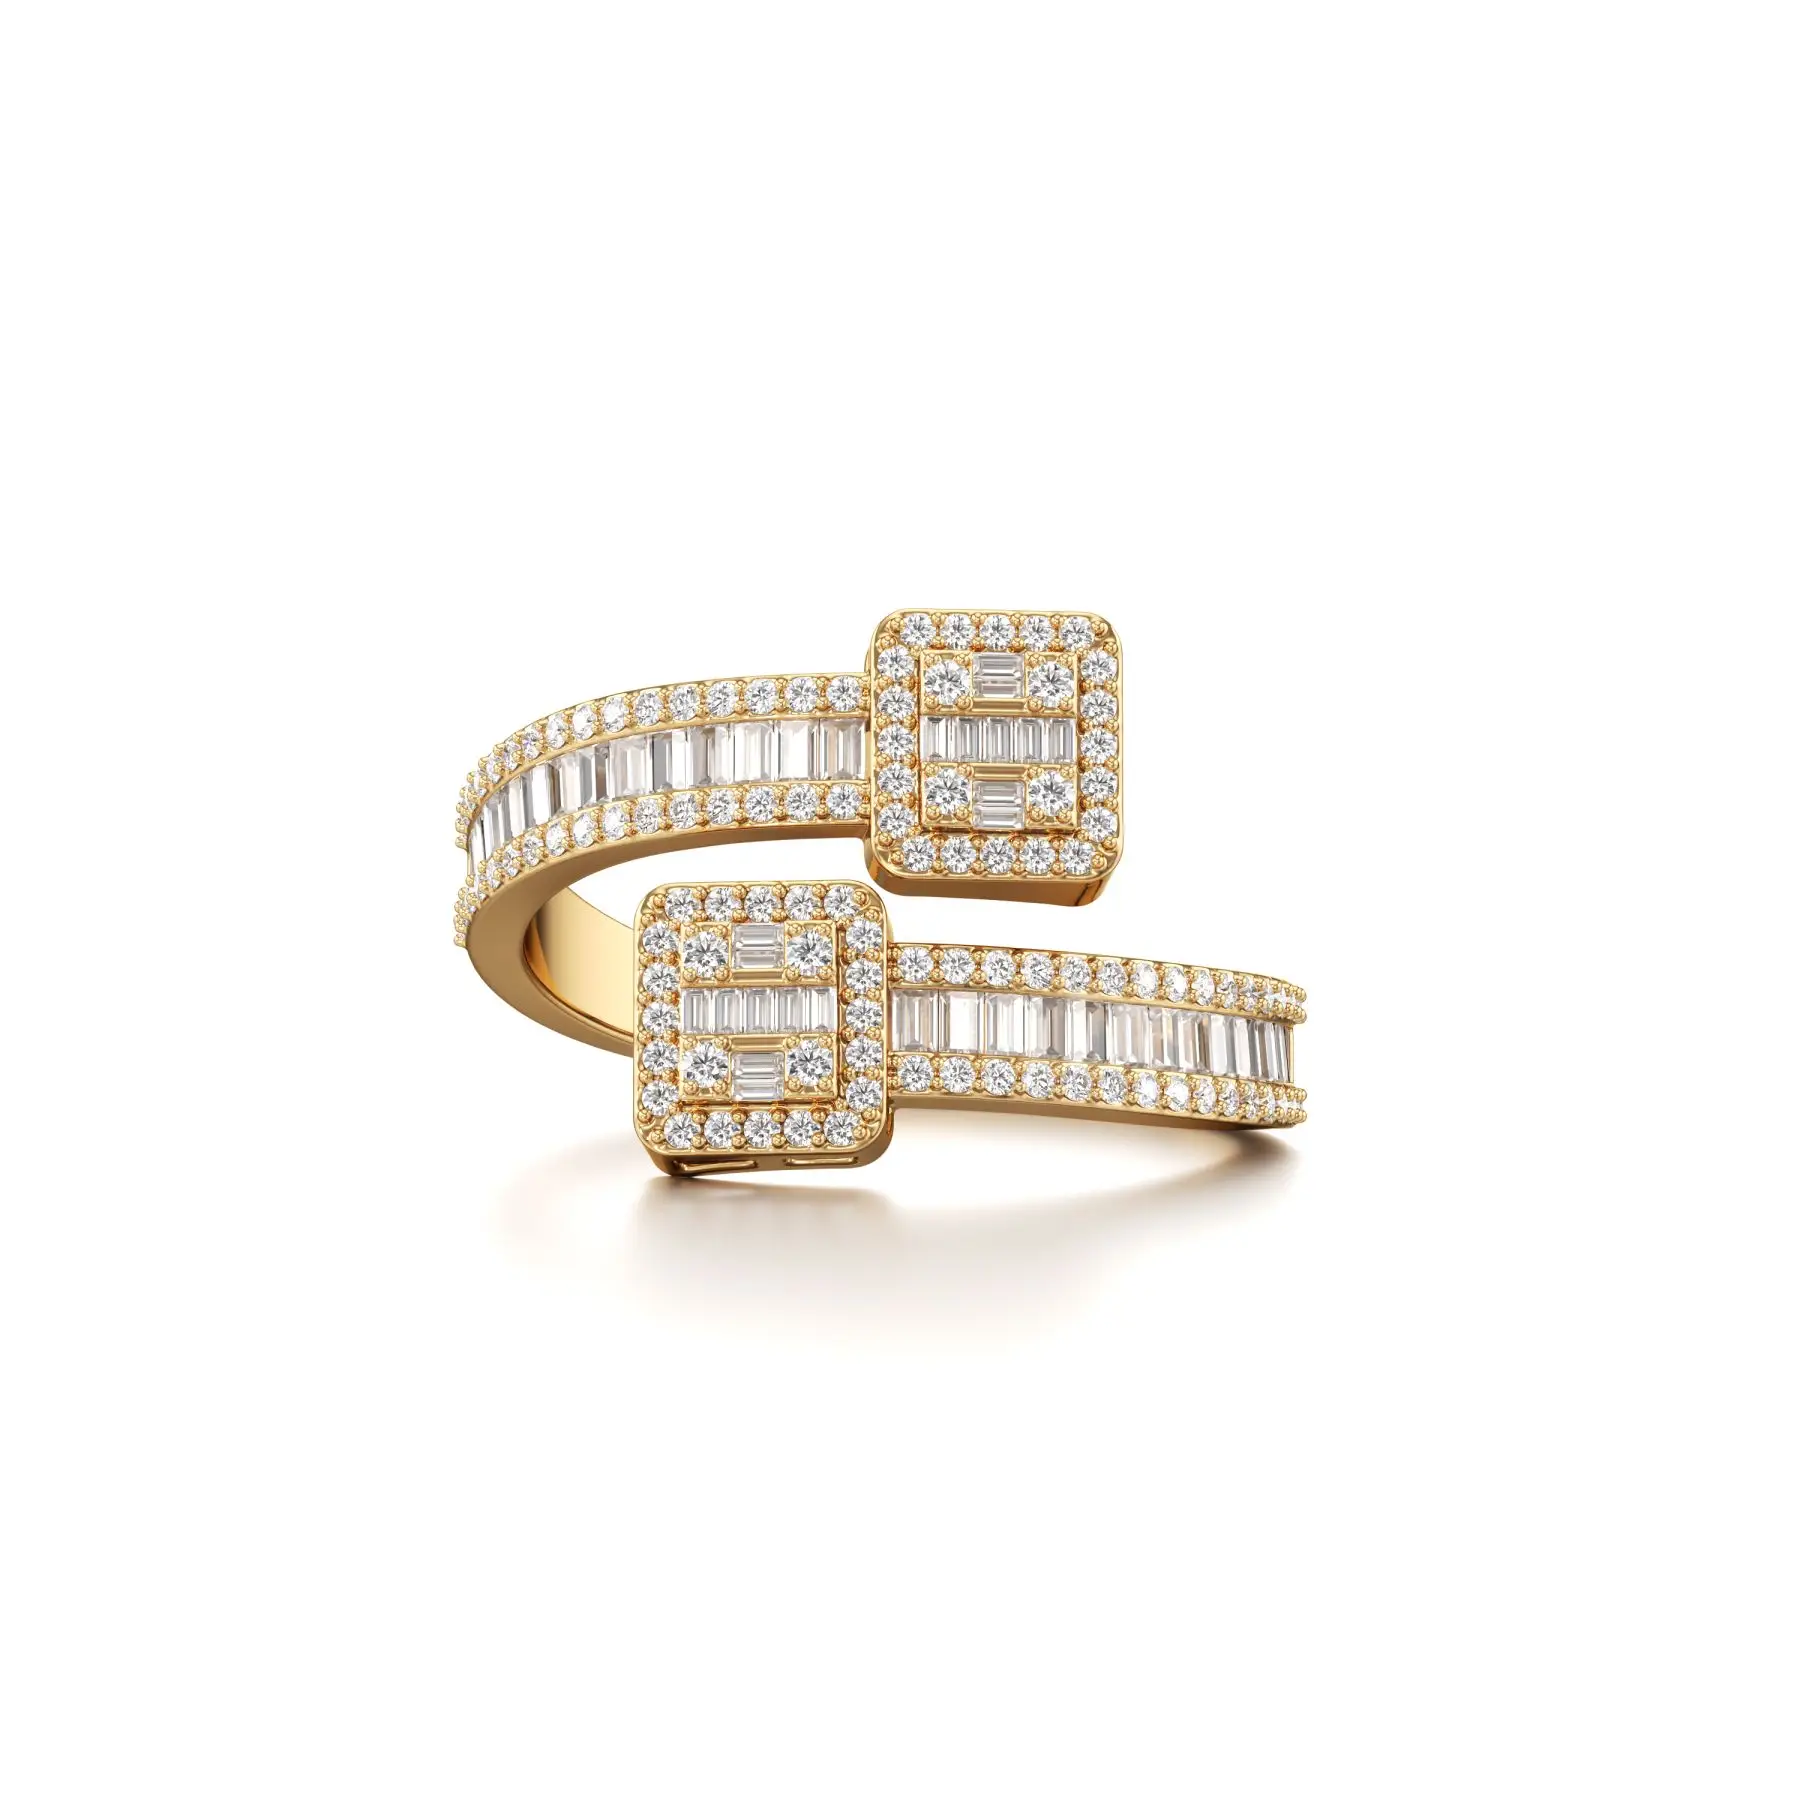 Baguette Curl Diamond Ring in Yellow 10k Gold